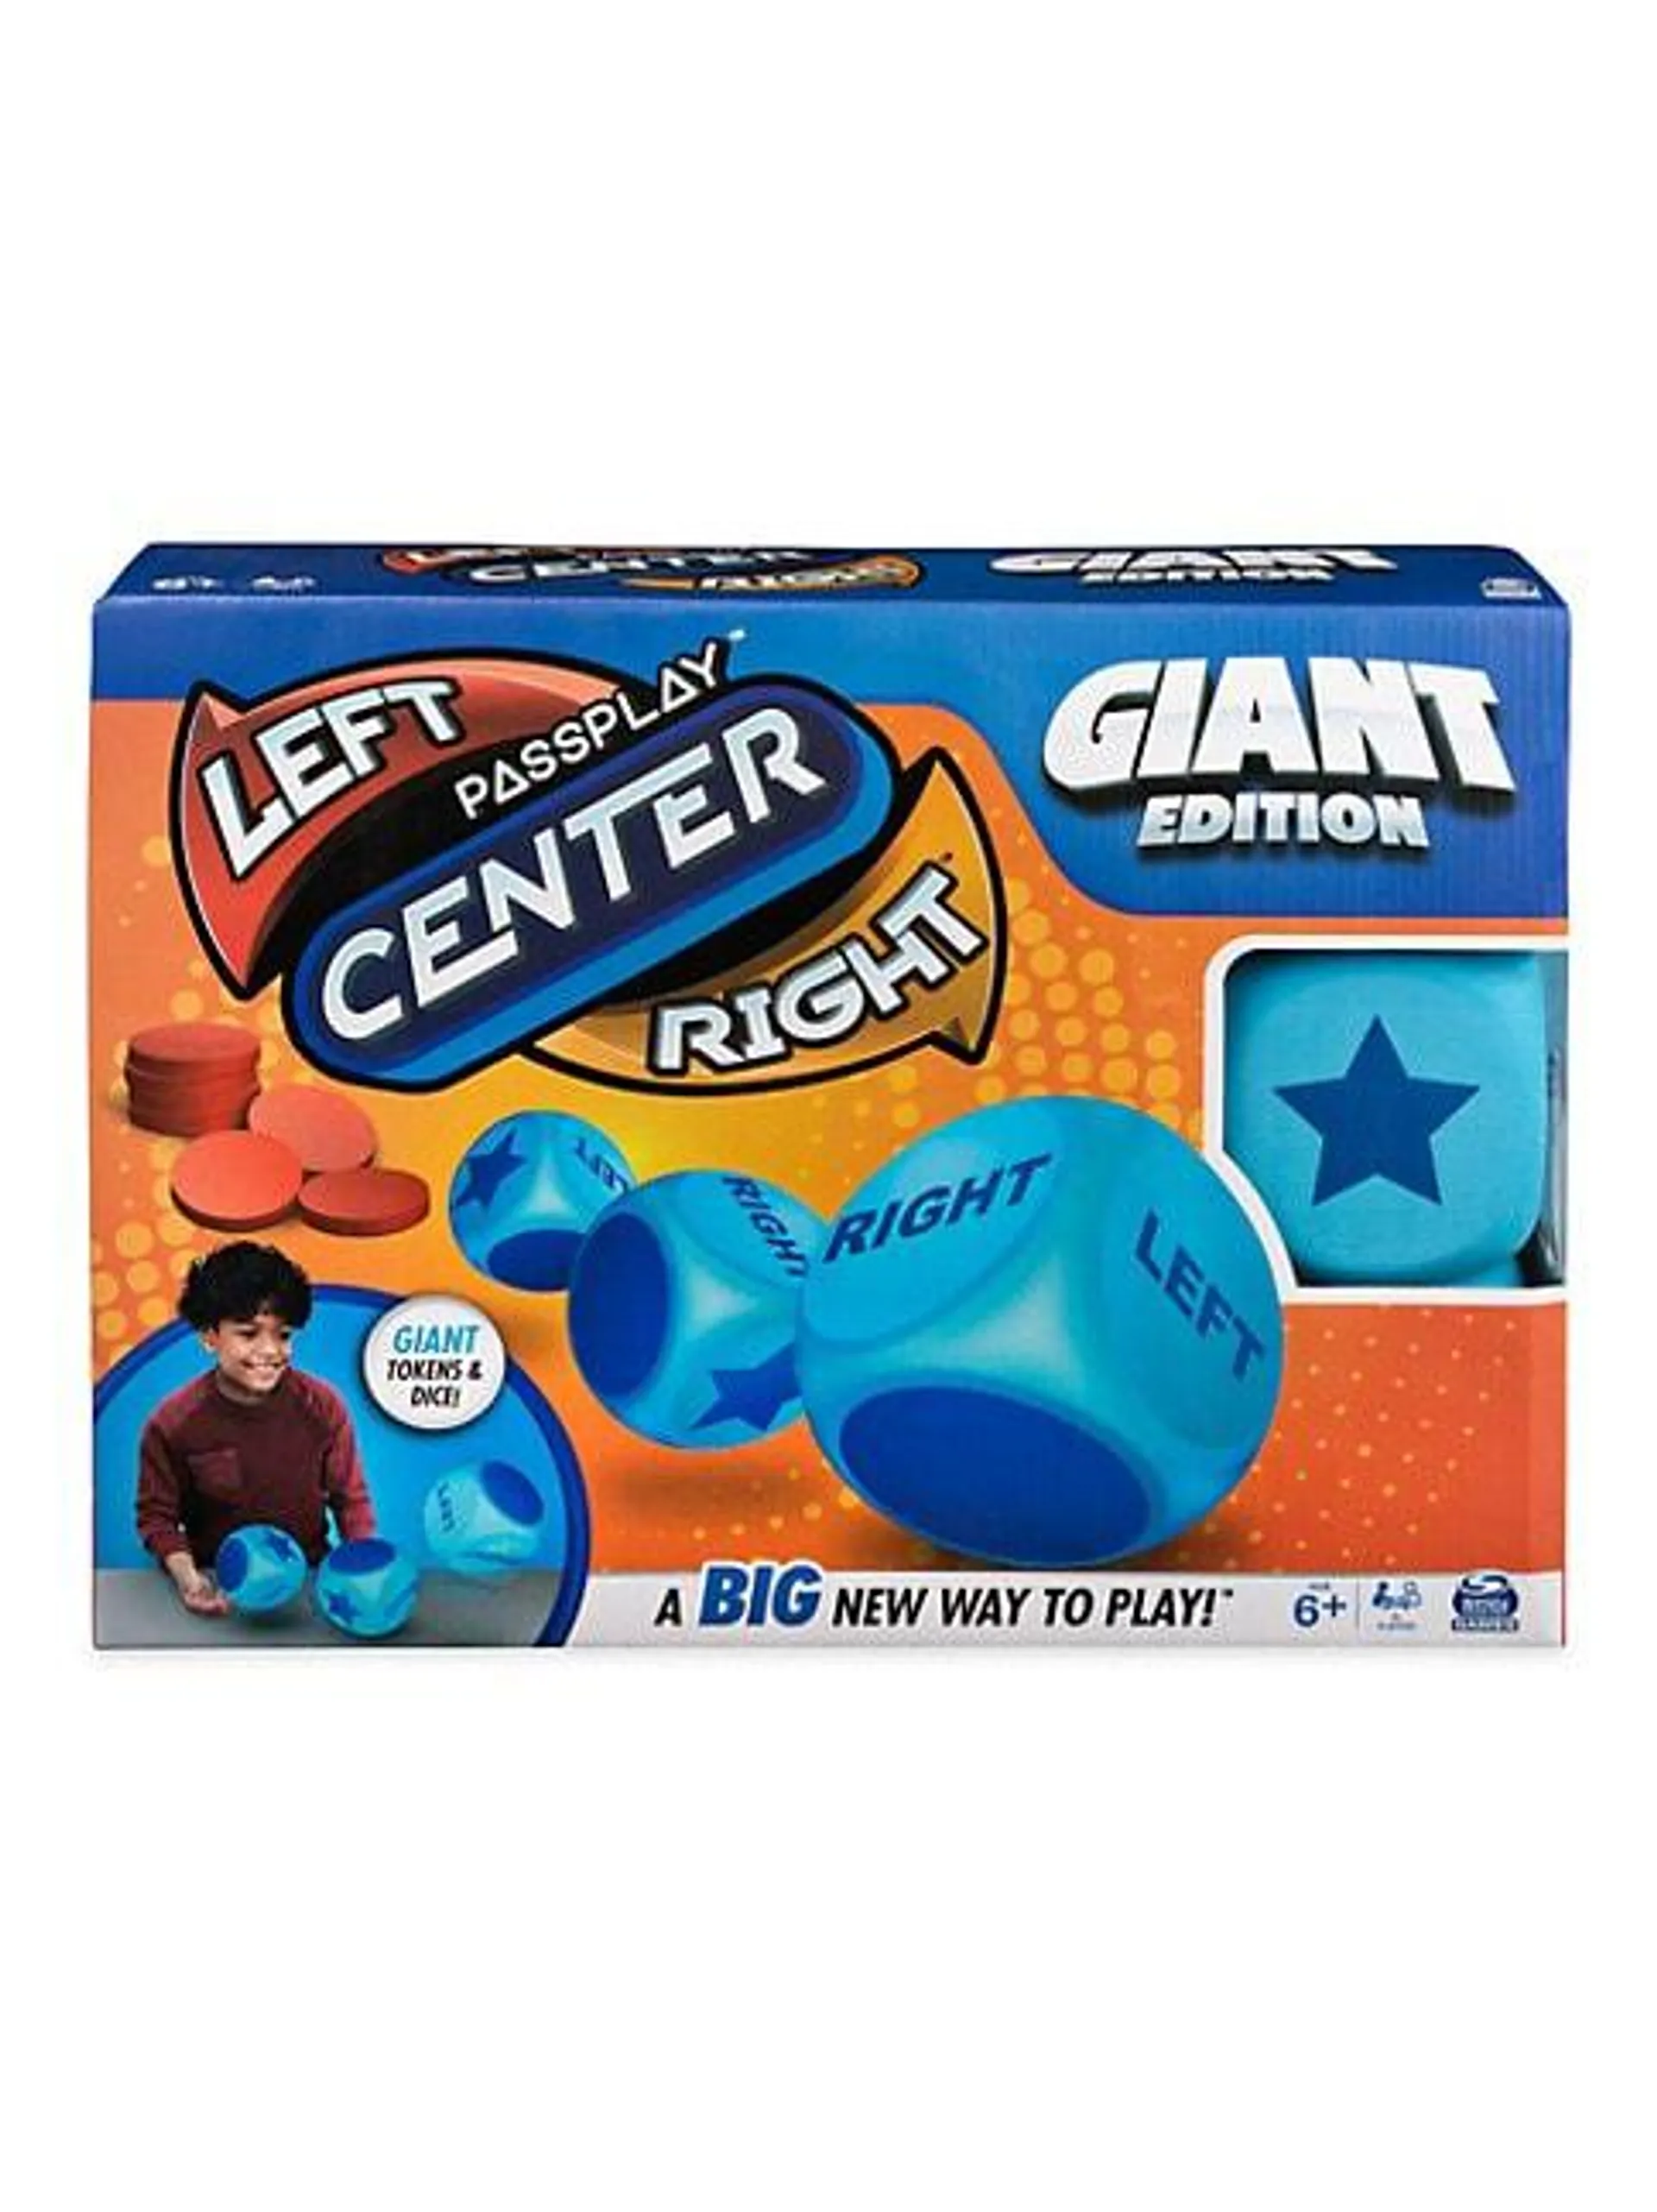 Giant Passplay: The Game Of Left Center Right